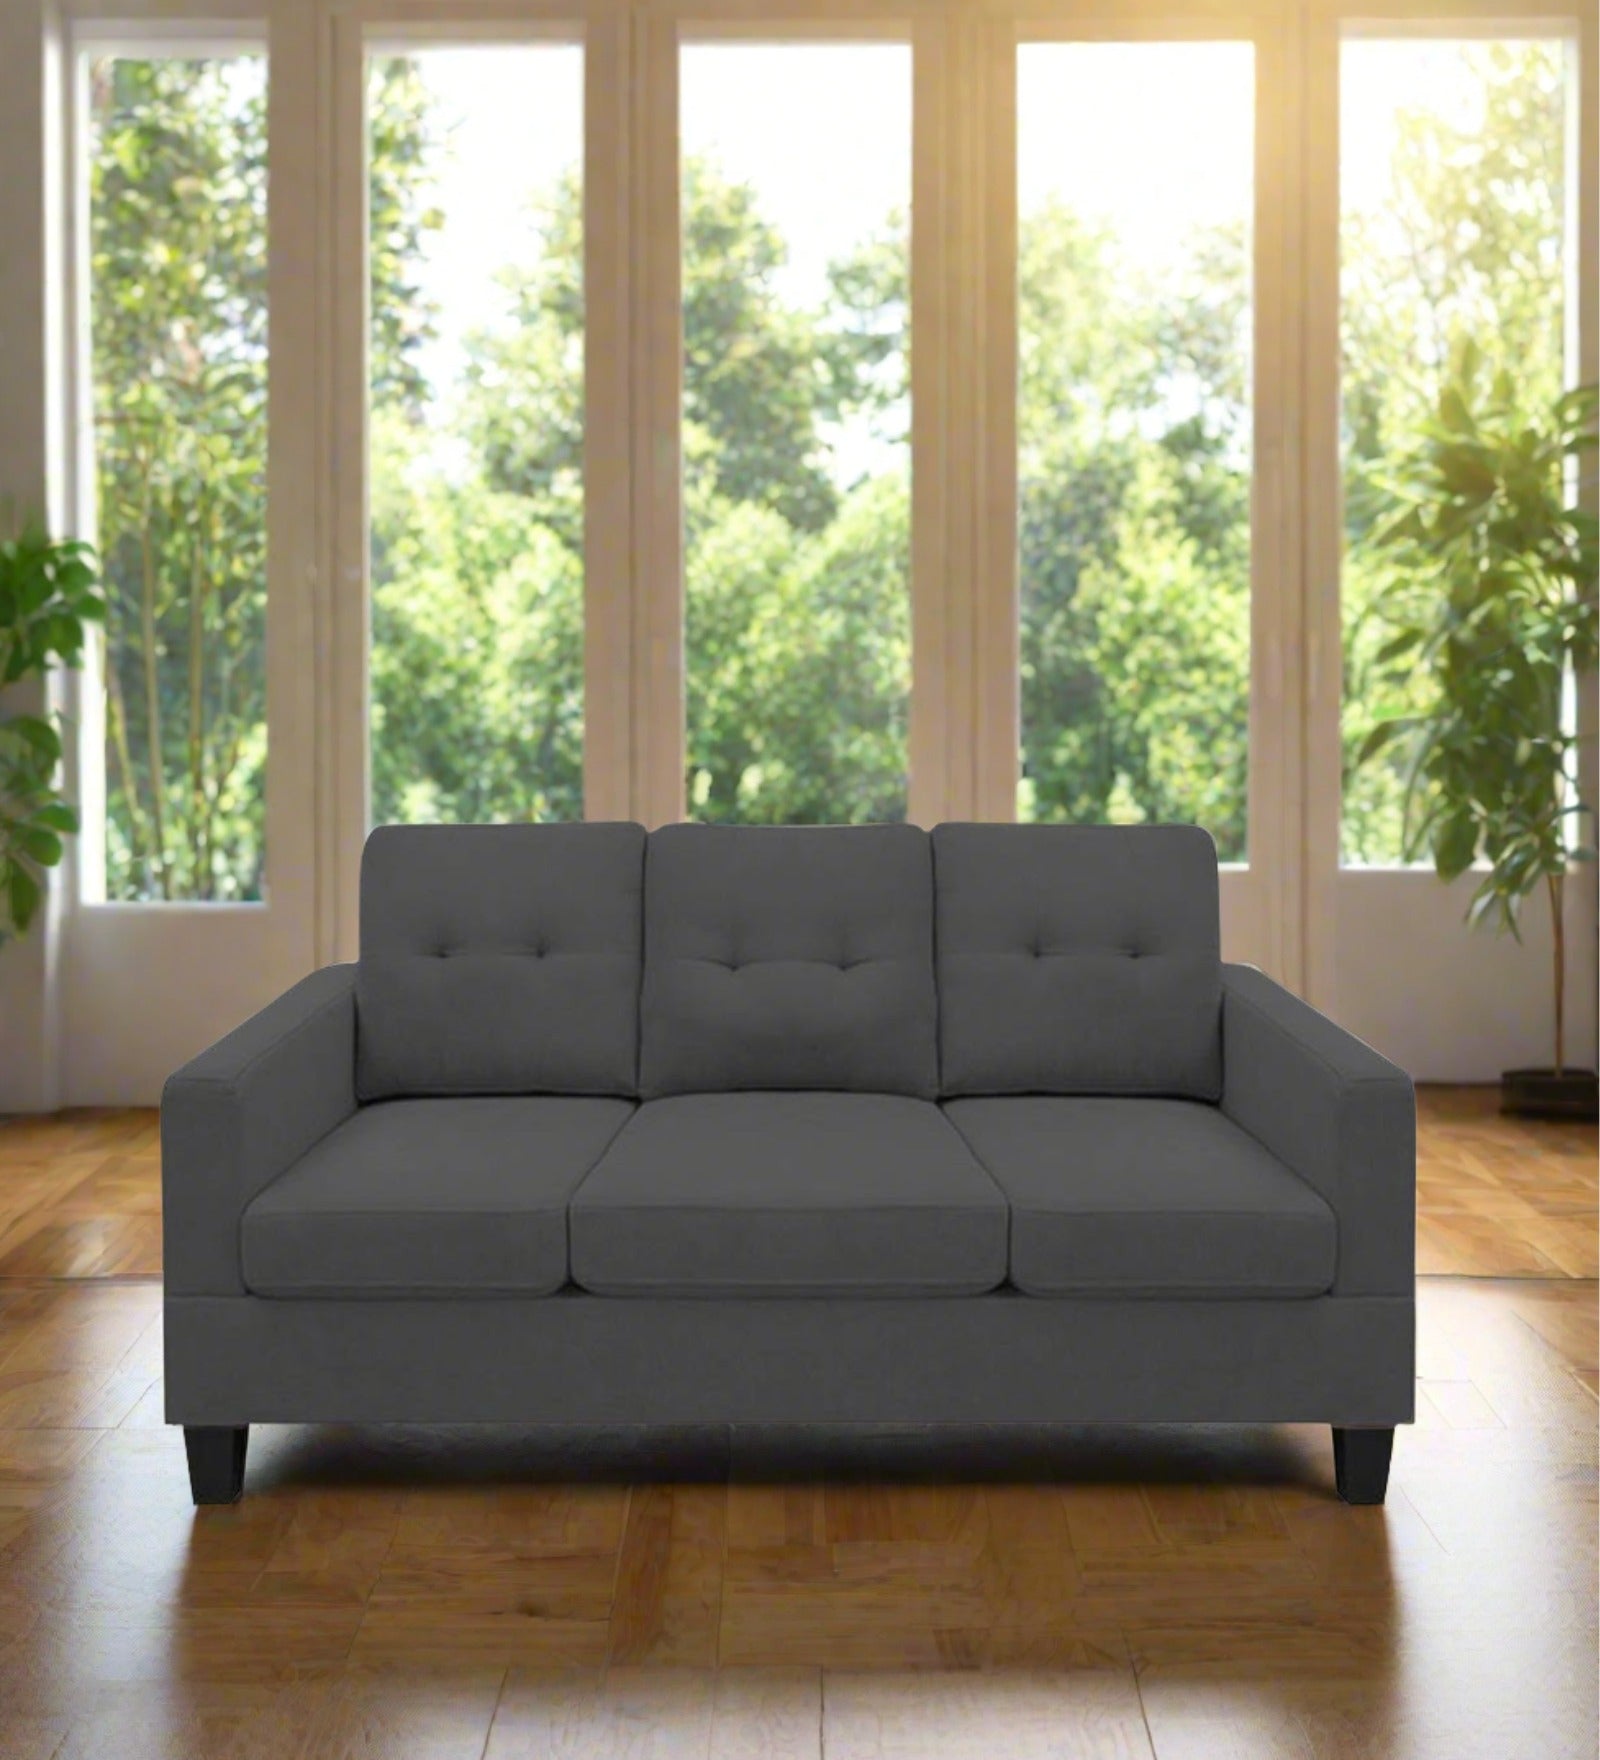 Thomas Fabric 3 Seater Sofa in Charcoal Grey Colour